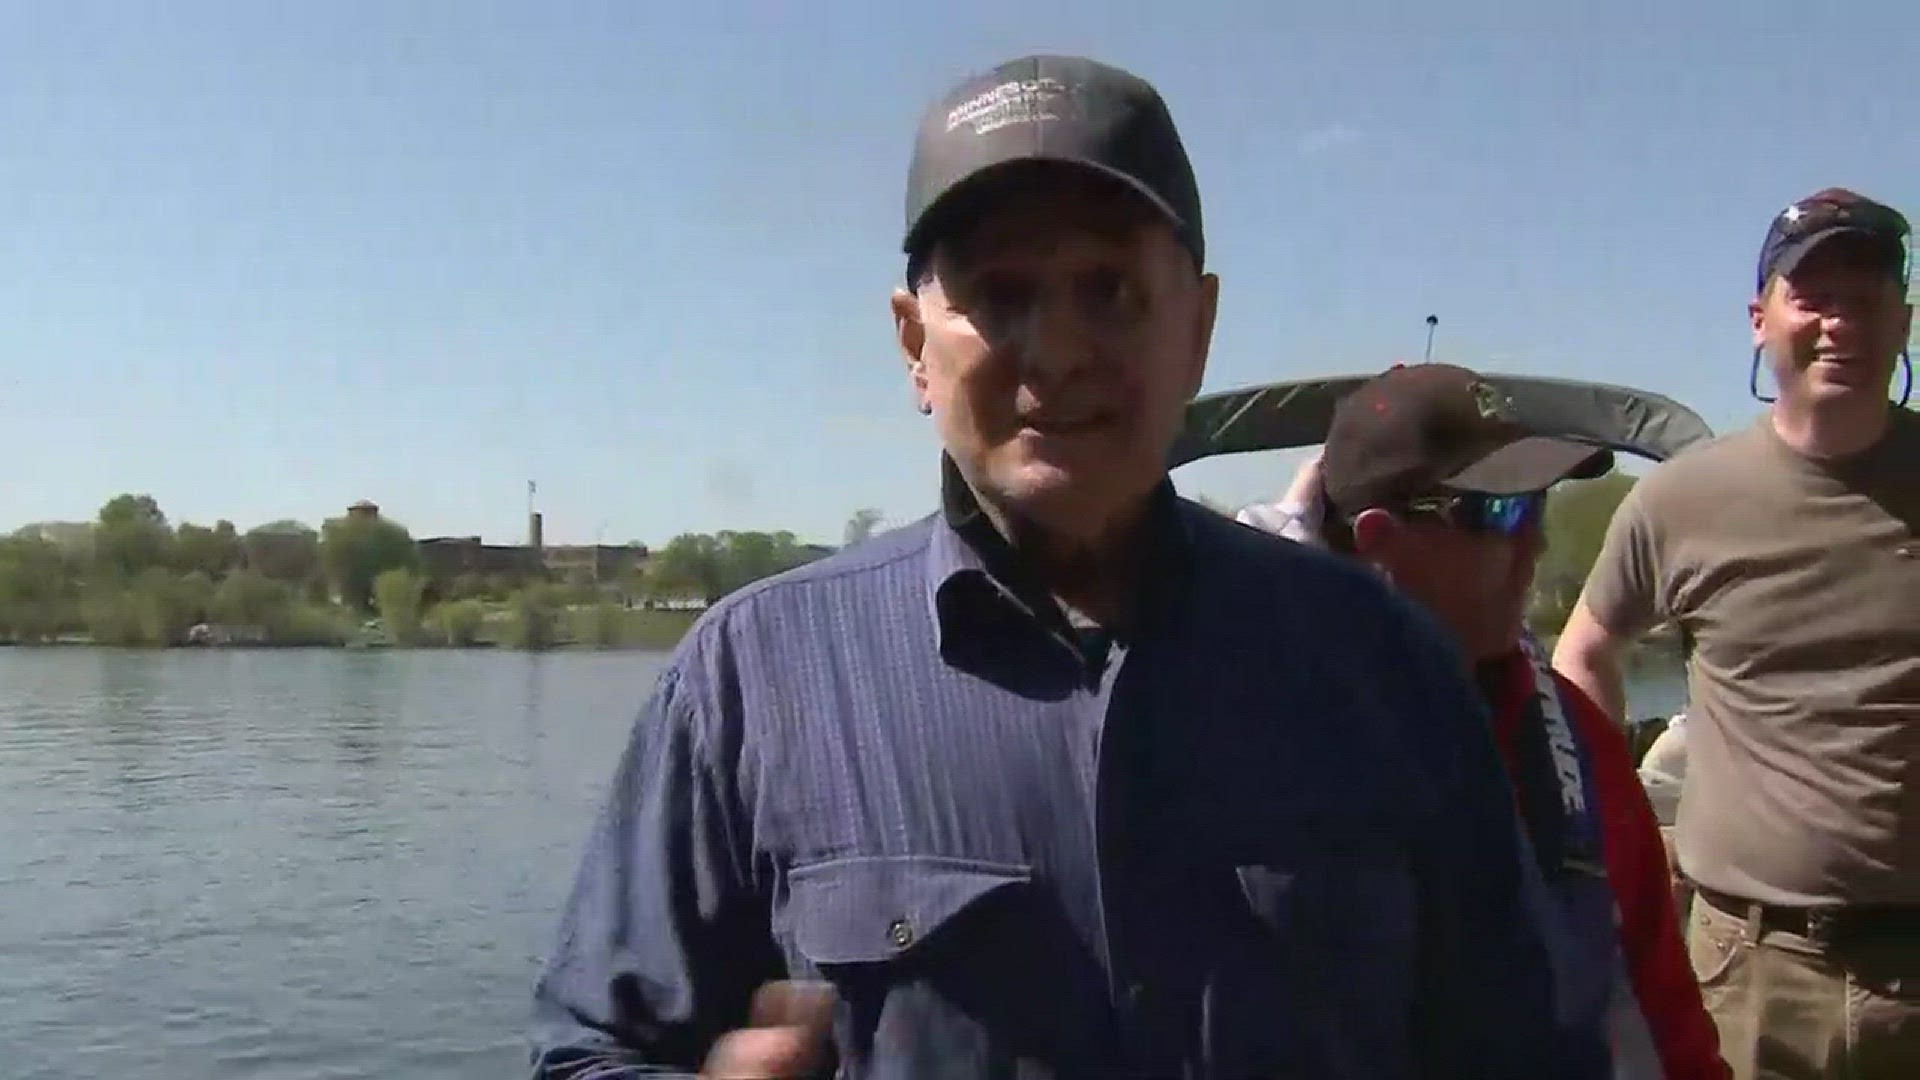 The Governor's Fishing Opener was held in St. Cloud this year on the Mississippi River